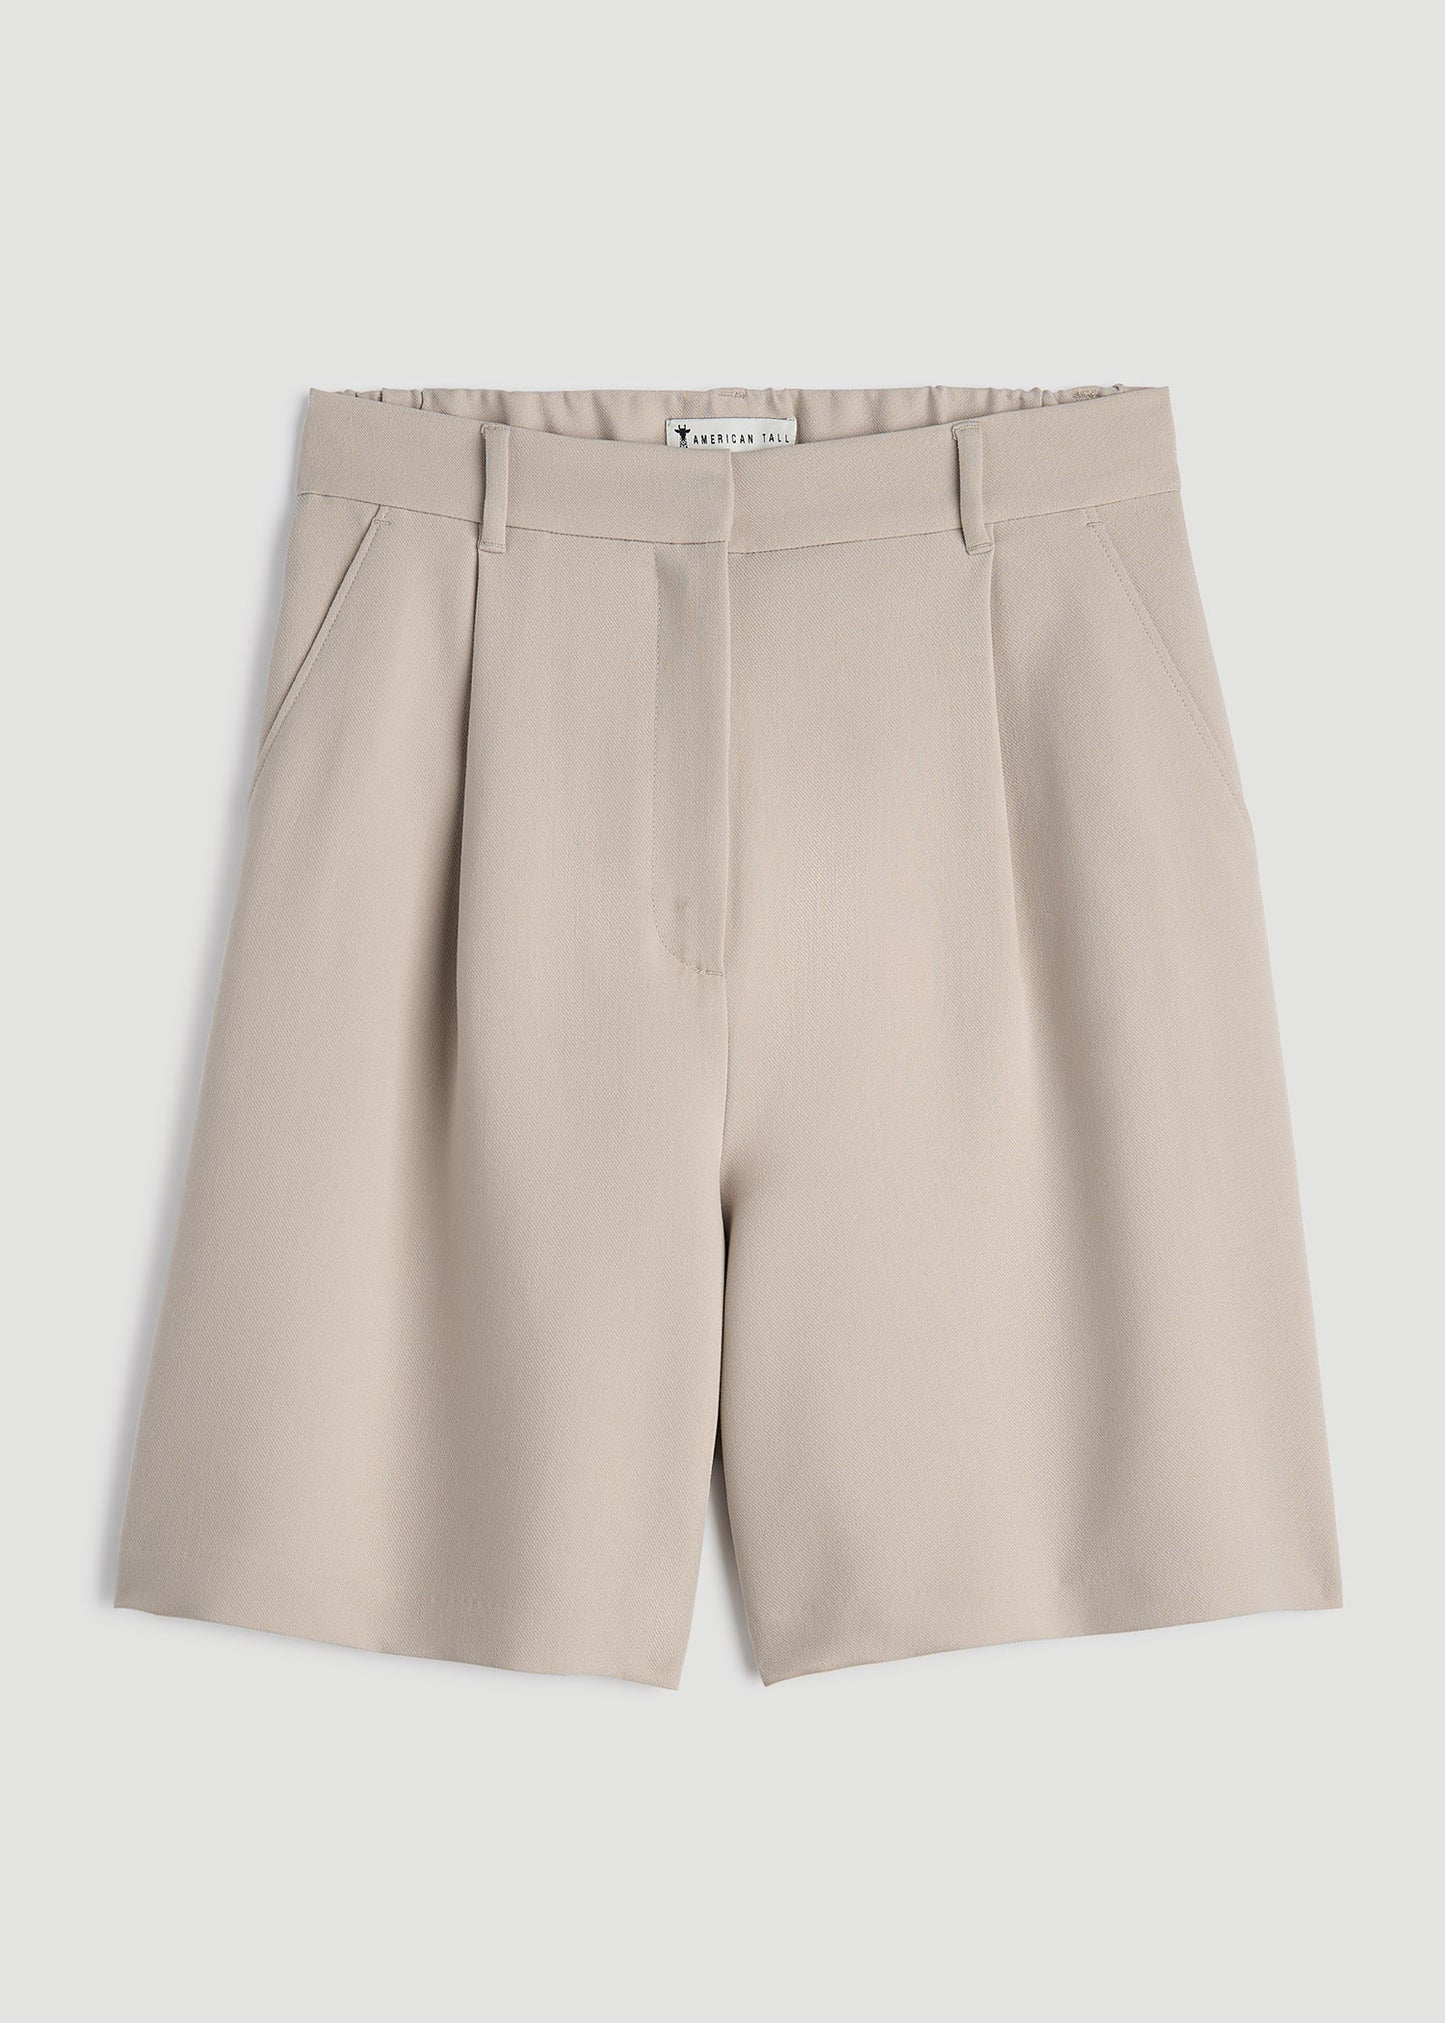 Pleated Tailored Shorts for Tall Women in Light Taupe